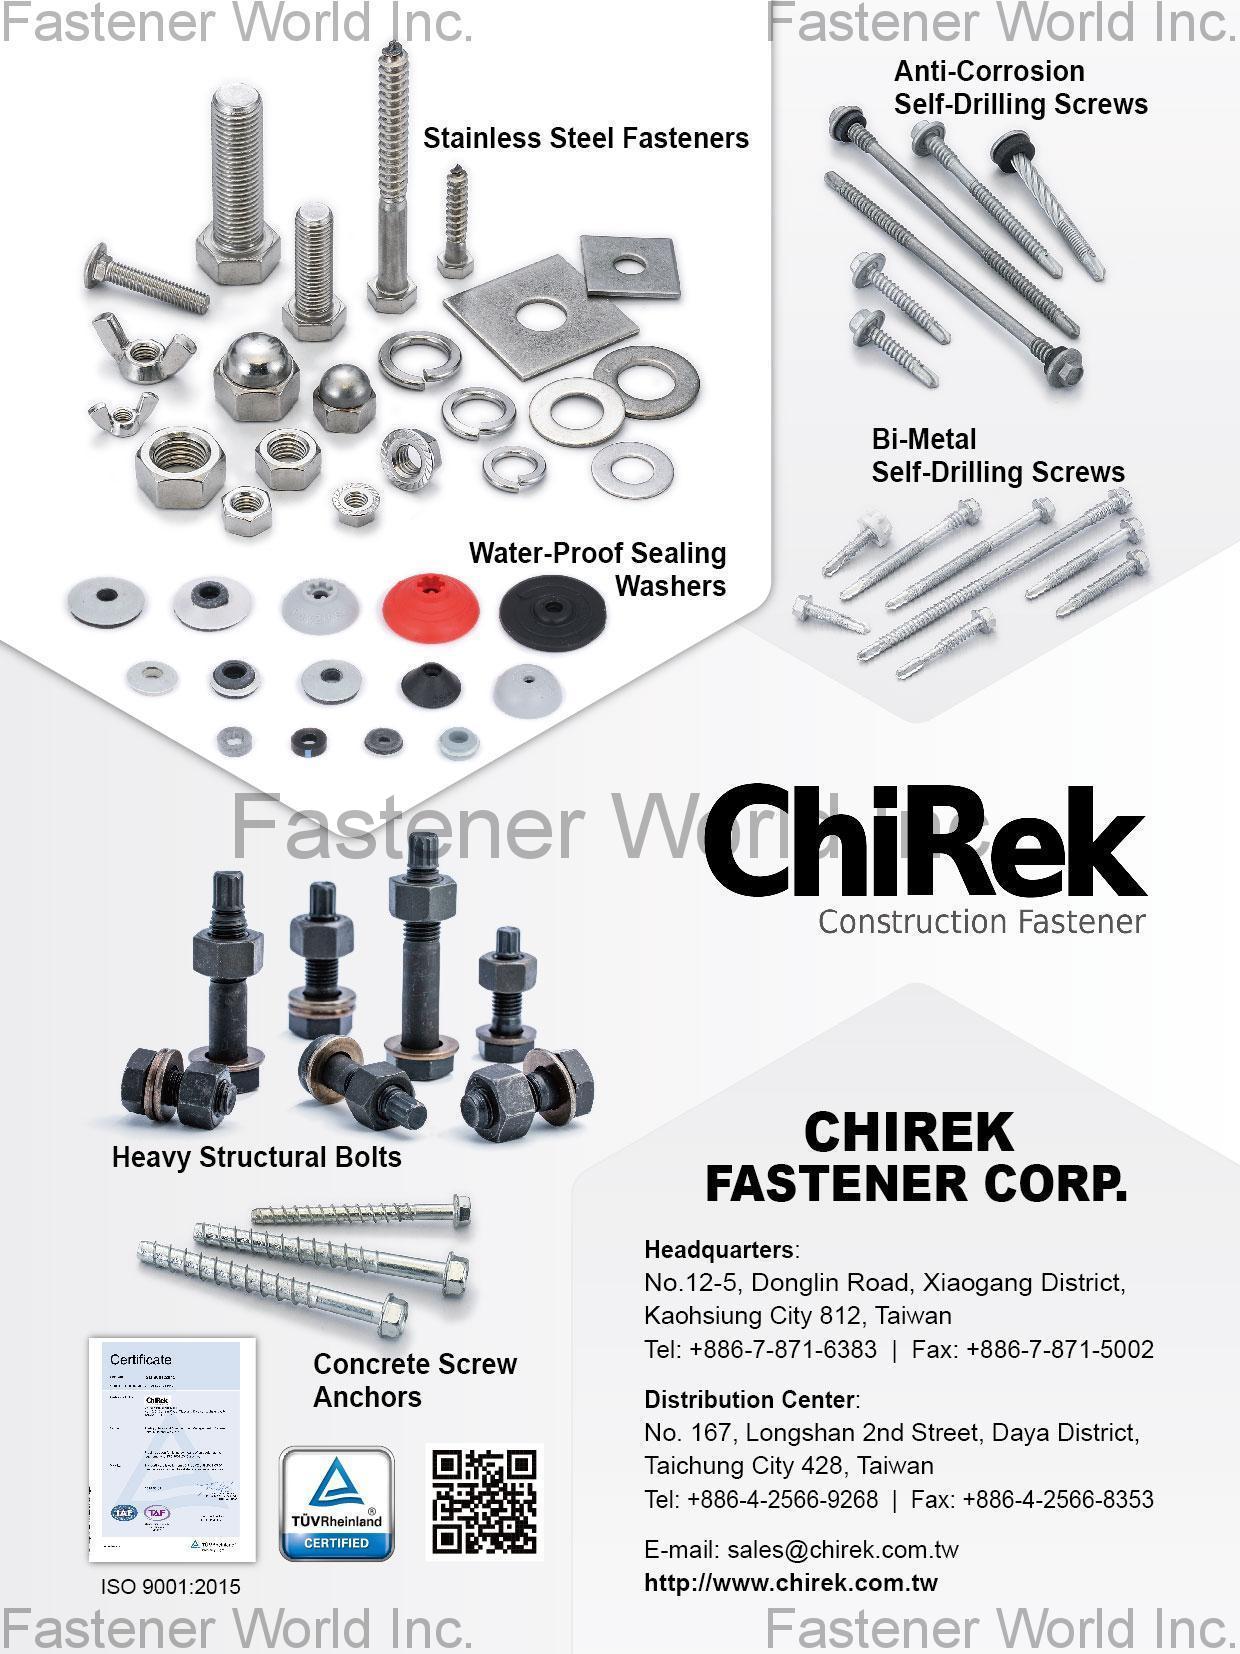 ChiRek Fastener Corporation , Stainless Steel Fasteners, Water-Proof Sealing Washers, Anti-Corrosion Self-Drilling Screws, Bi-Metal Self-Drilling Screws, Heavy Structural Bolts, Concrete Screw Anchors , Stainless Steel Screws